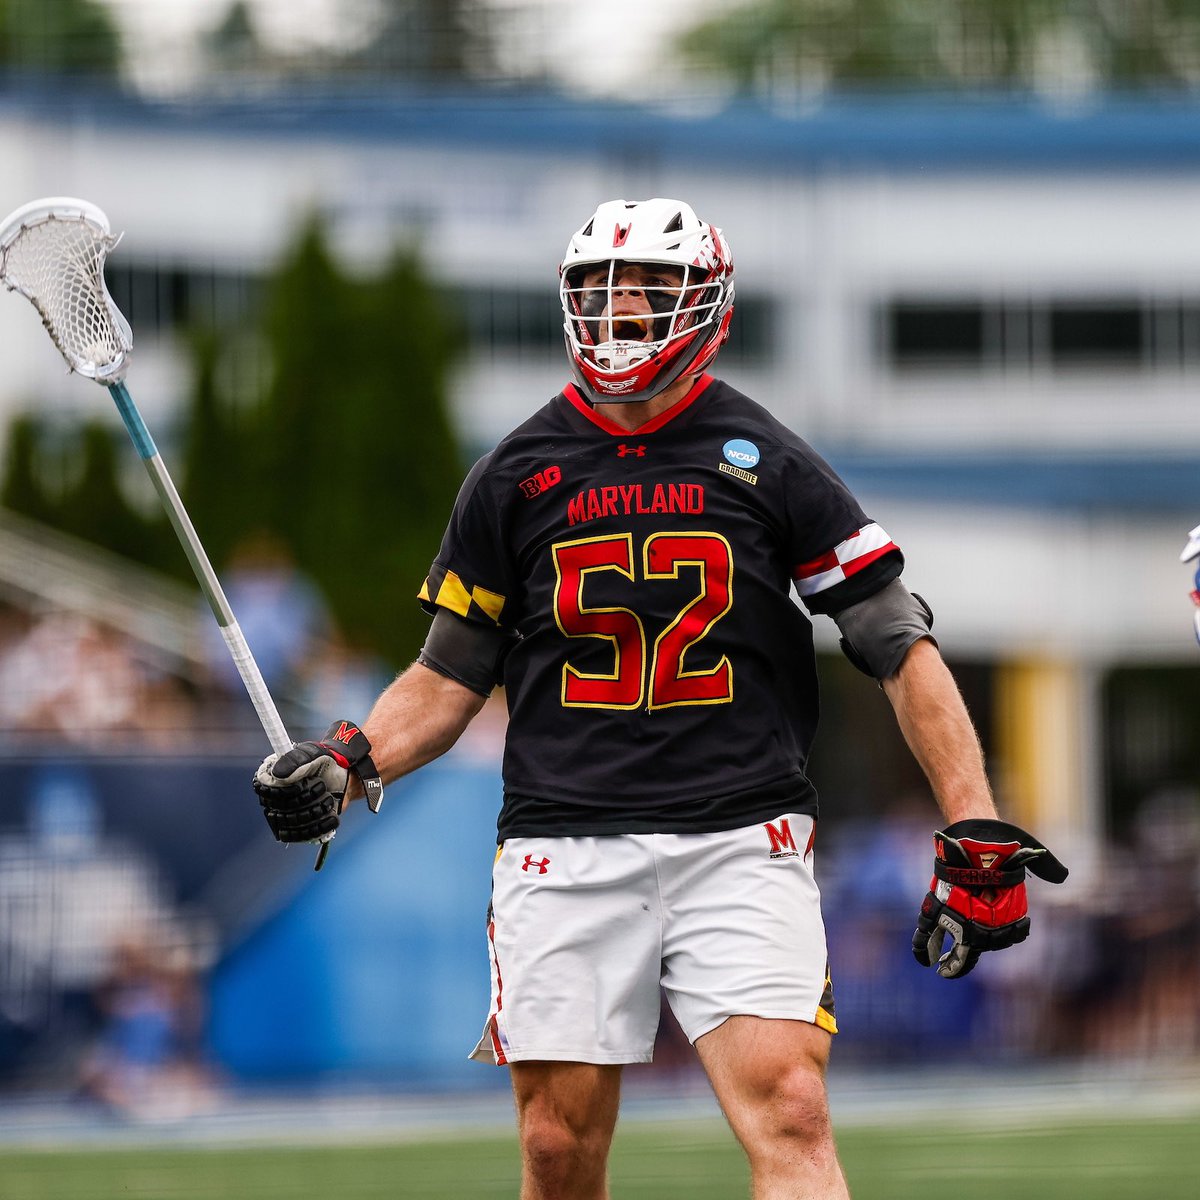 Monday morning mood because we head to Philly this week! #BeTheBest